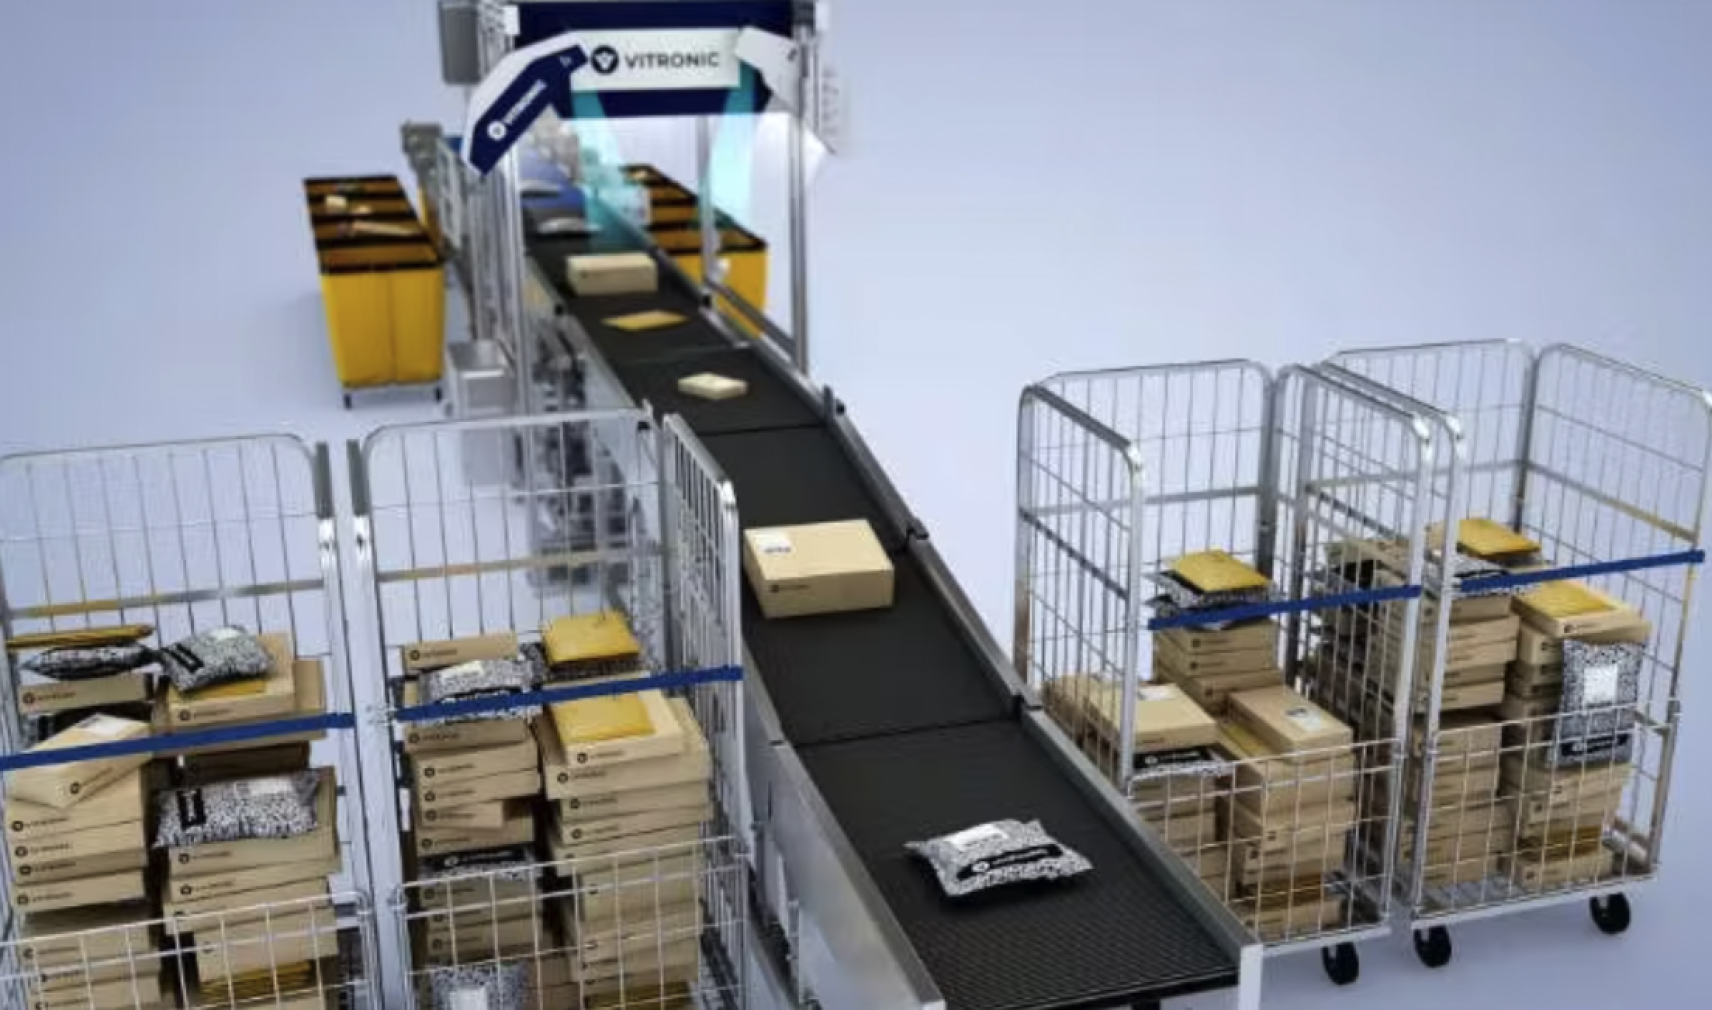 Vitronic’s products include solutions that read codes and plain text on packages on conveyors at distribution centres